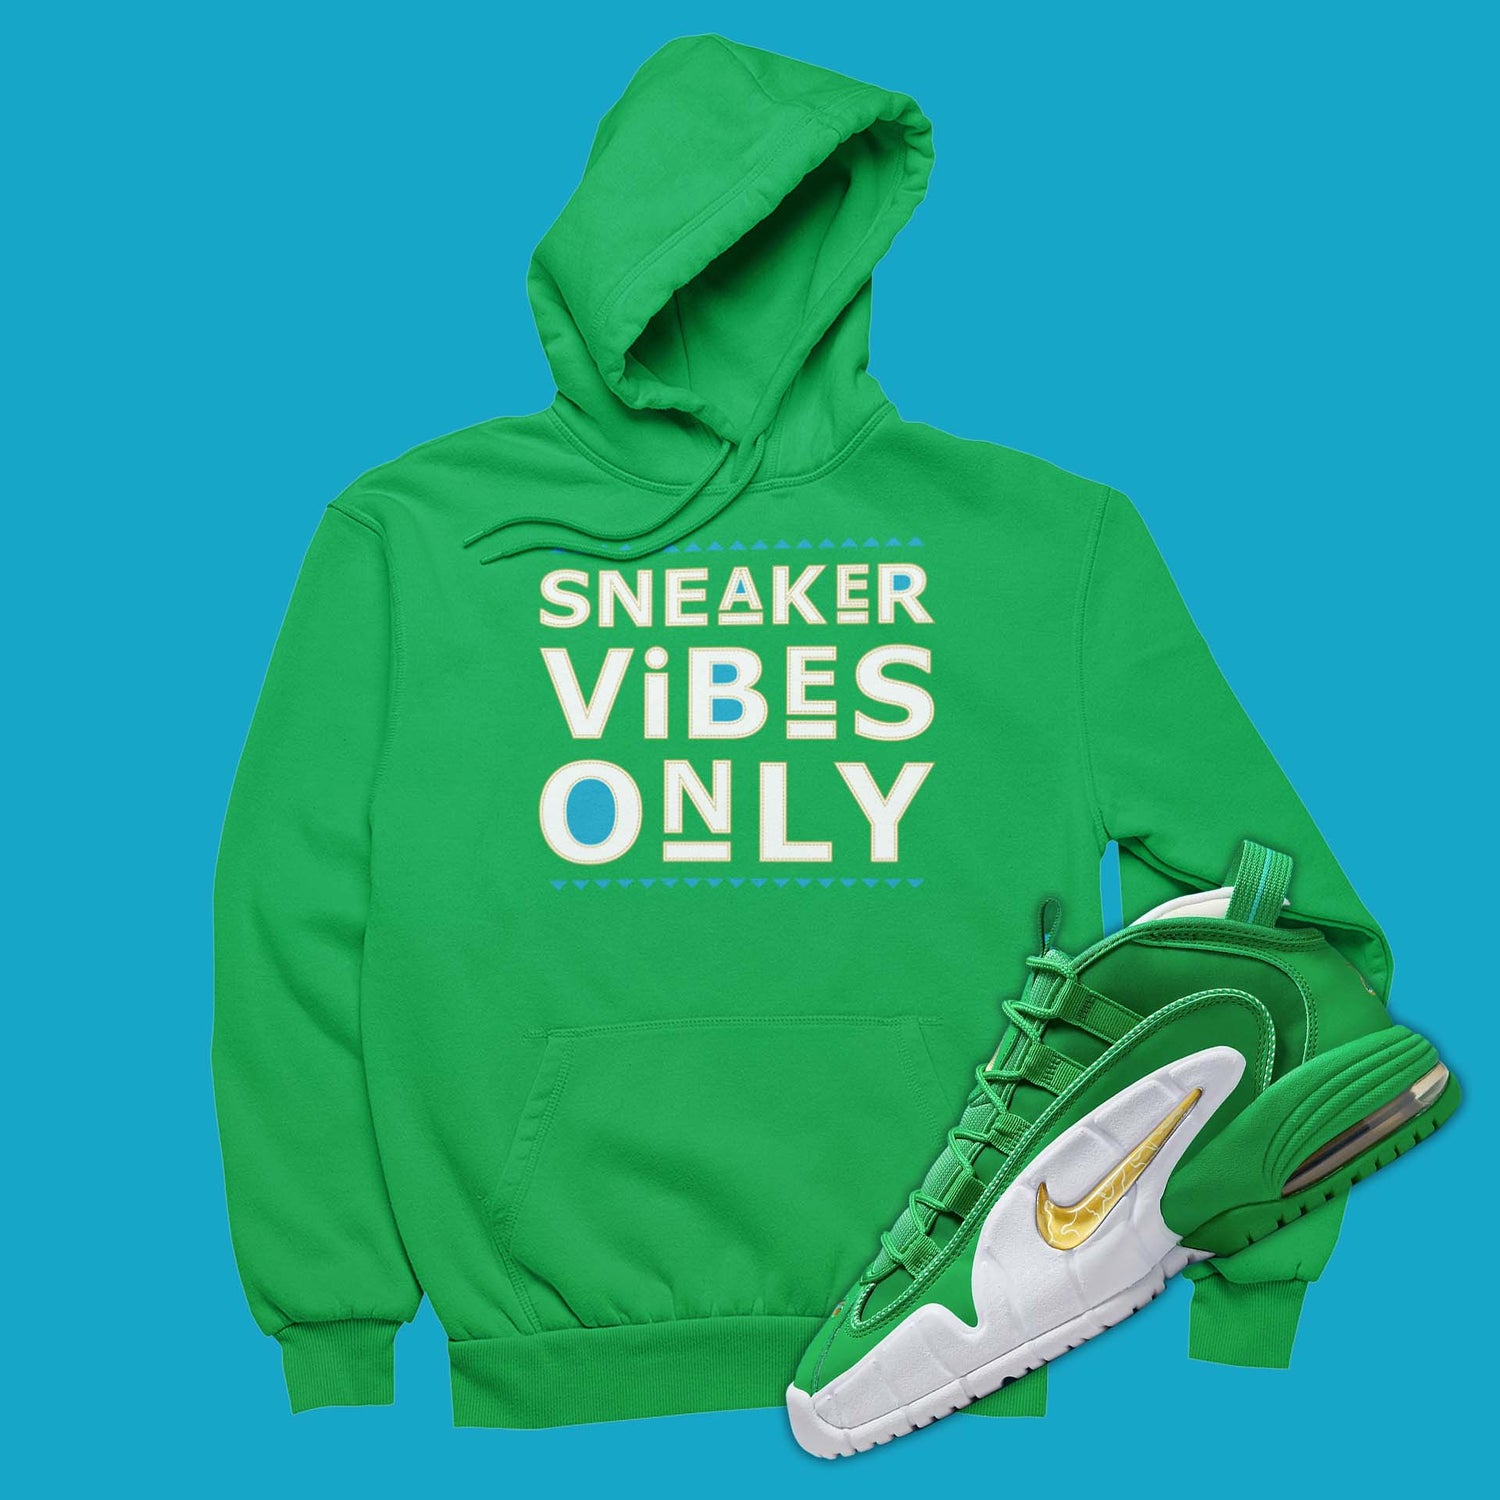 This sneaker match hoodie is the perfect sweatshirt to match your Air Max Penny 1 Stadium Green